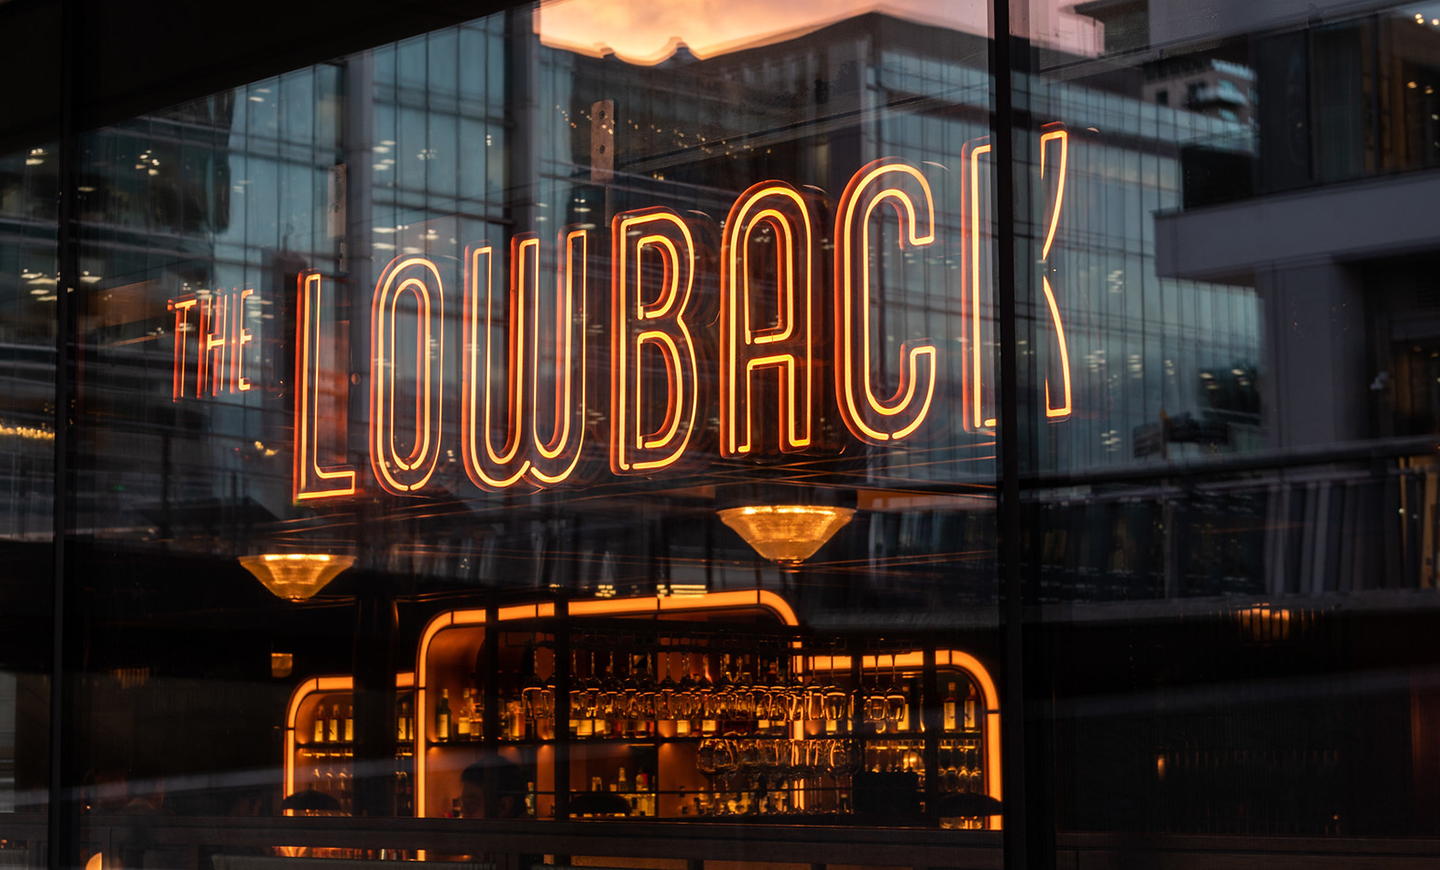 The Lowback logo as a neon sign in the window of the bar, by SAINT Design for Hawksmoor.